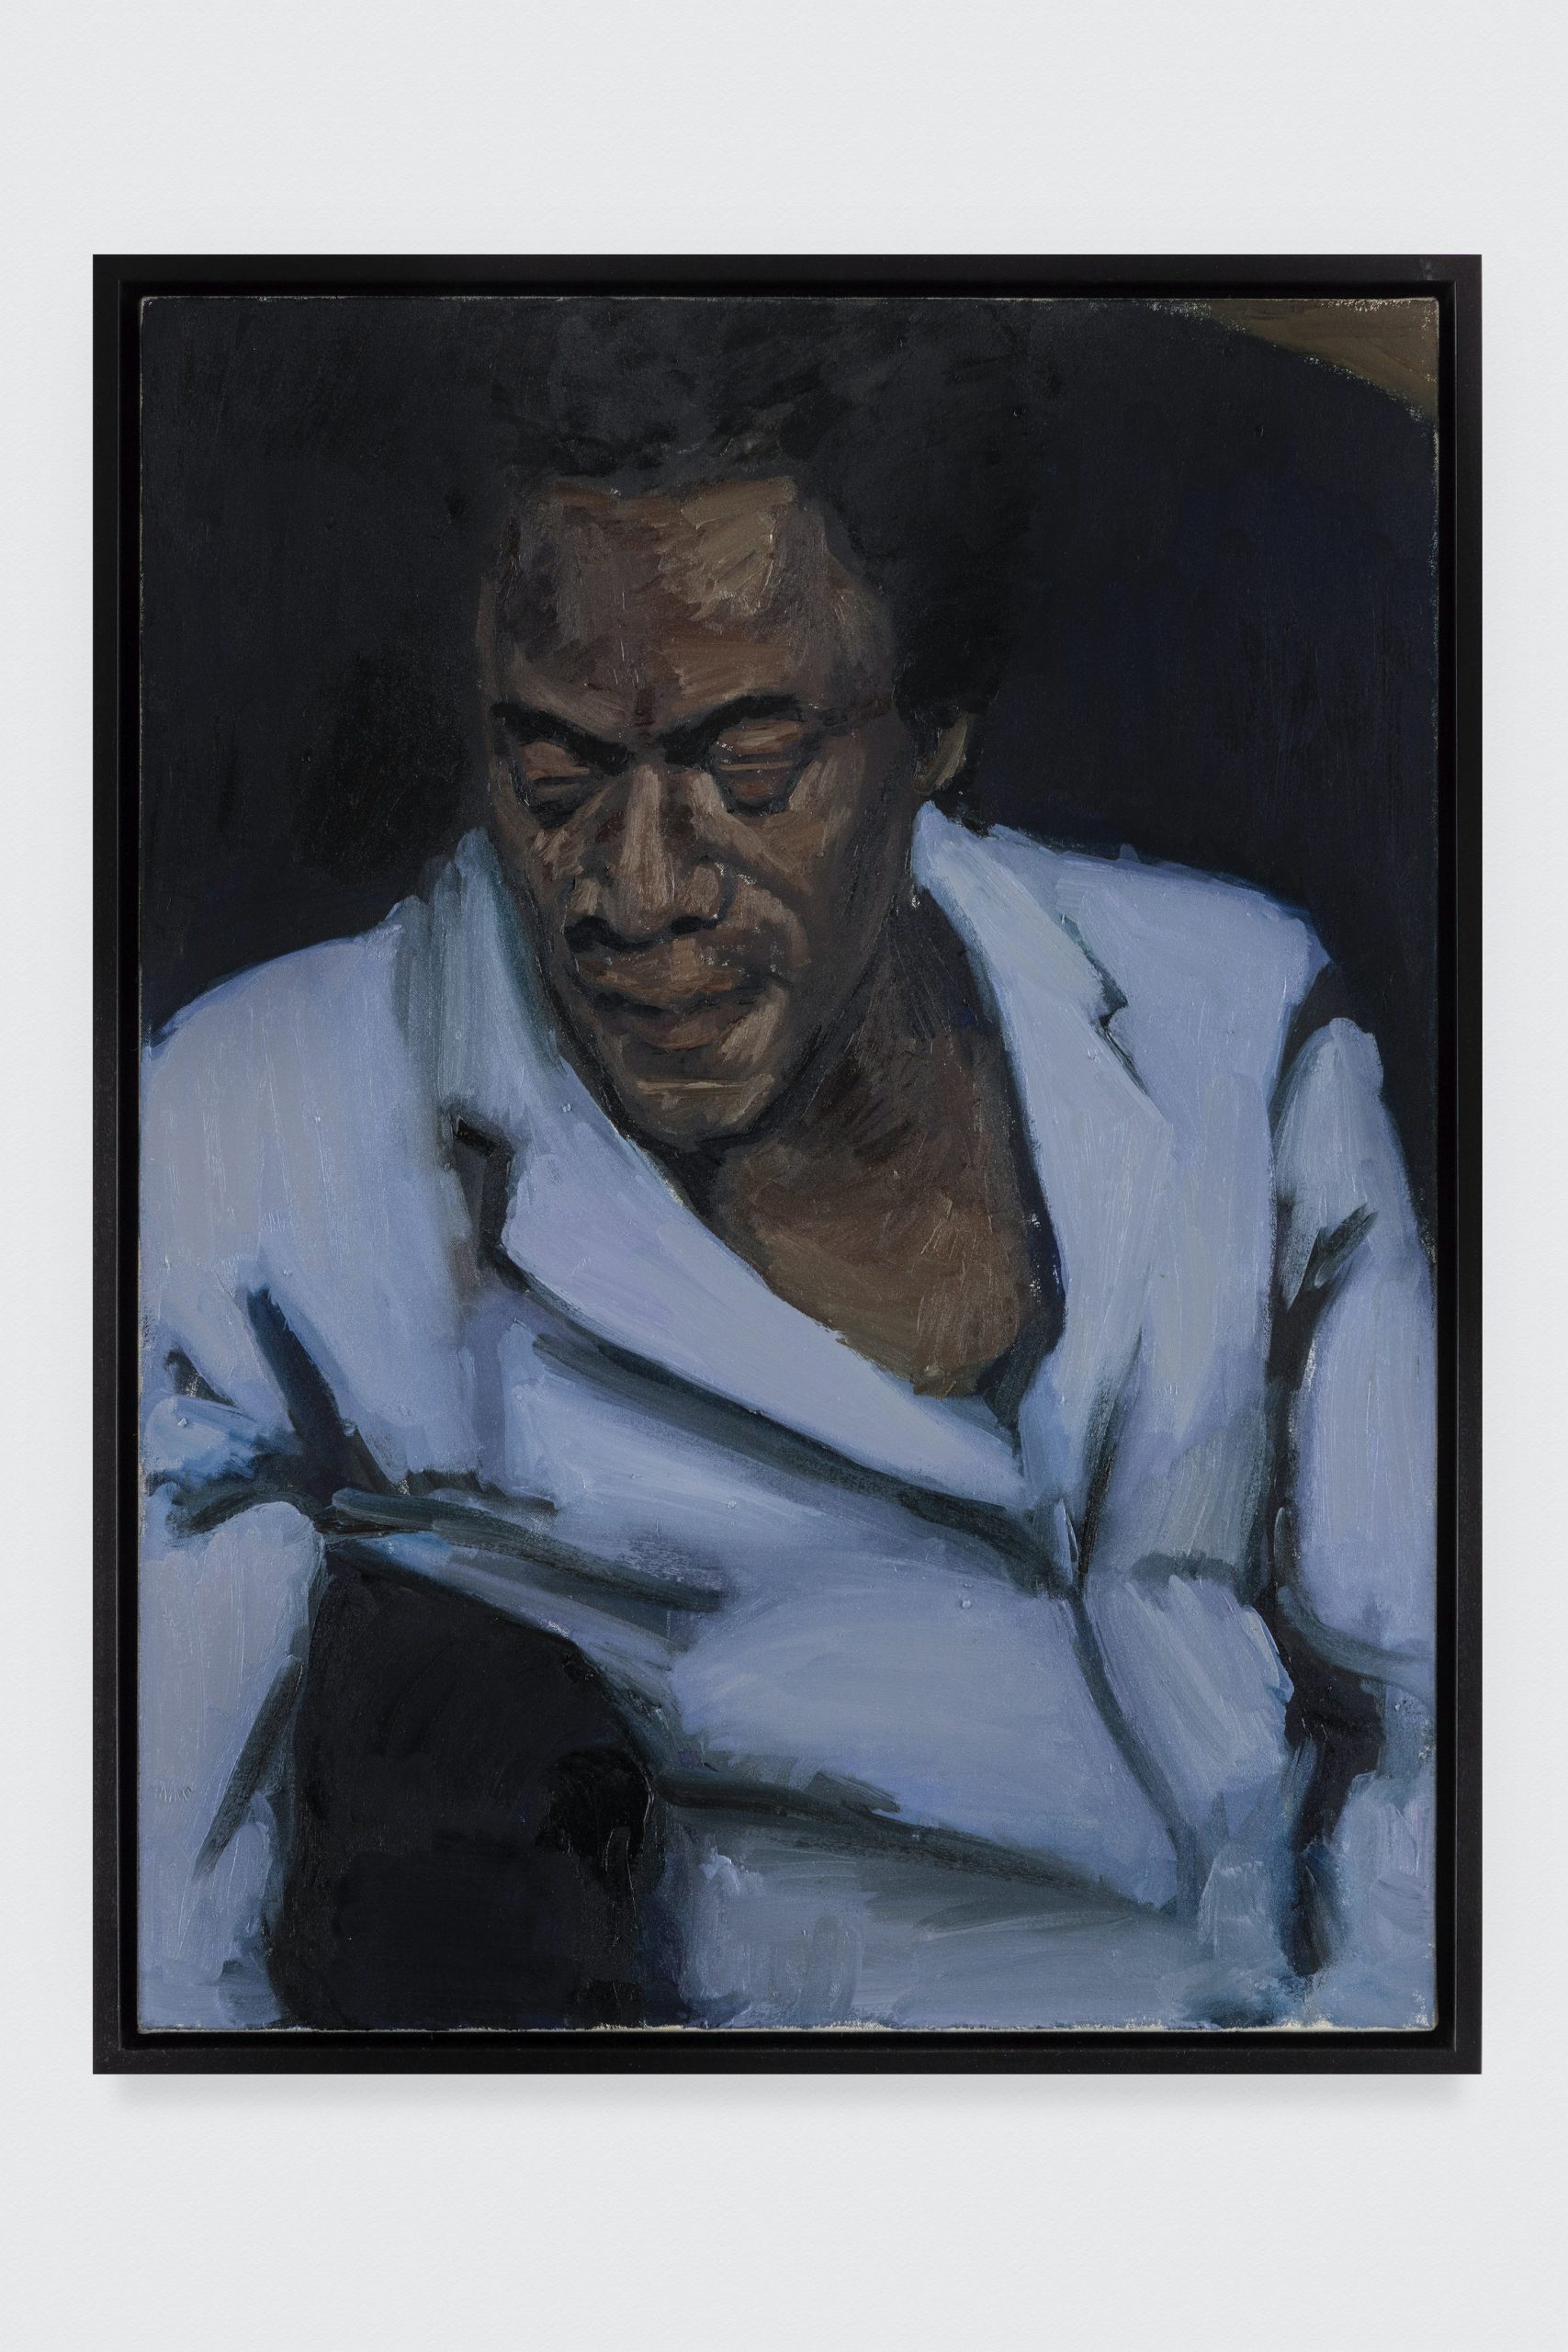 Lynette Yiadom-Boakye. Carpal Tunneller, 2013. Oil on canvas. 31 1/2 x 23 5/8 in. © Lynette Yiadom-Boakye. Courtesy of the artist, Jack Shainman Gallery, New York and Corvi-Mora, London. The Eileen Harris Norton Collection. Photo: Charles White.